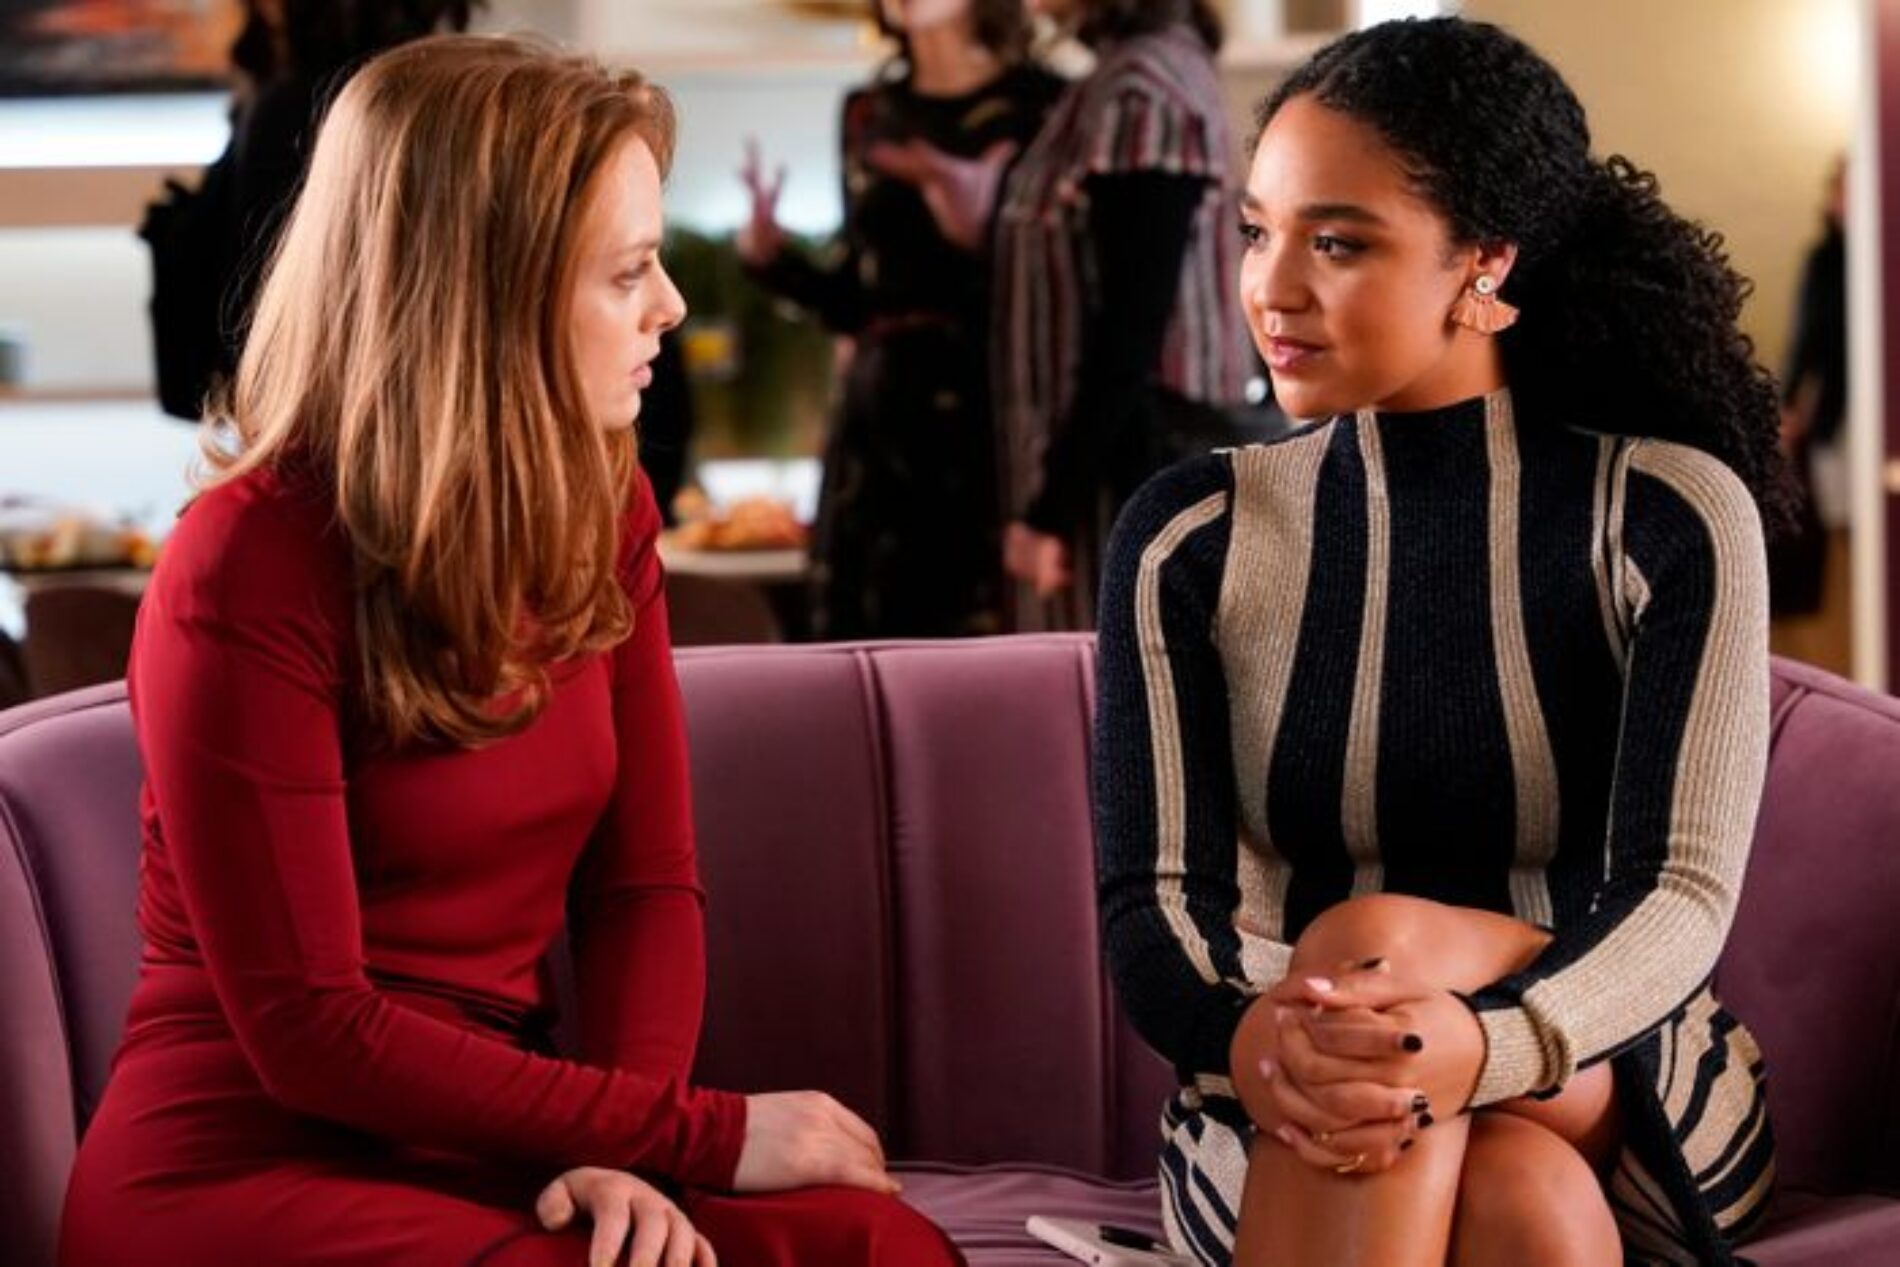 ‘We Deserve To See Stories That Are For Us, By Us.’ Actress Aisha Dee Calls Out Problematic Kat/Eva Romance In ‘The Bold Type’ Following Fan Outrage